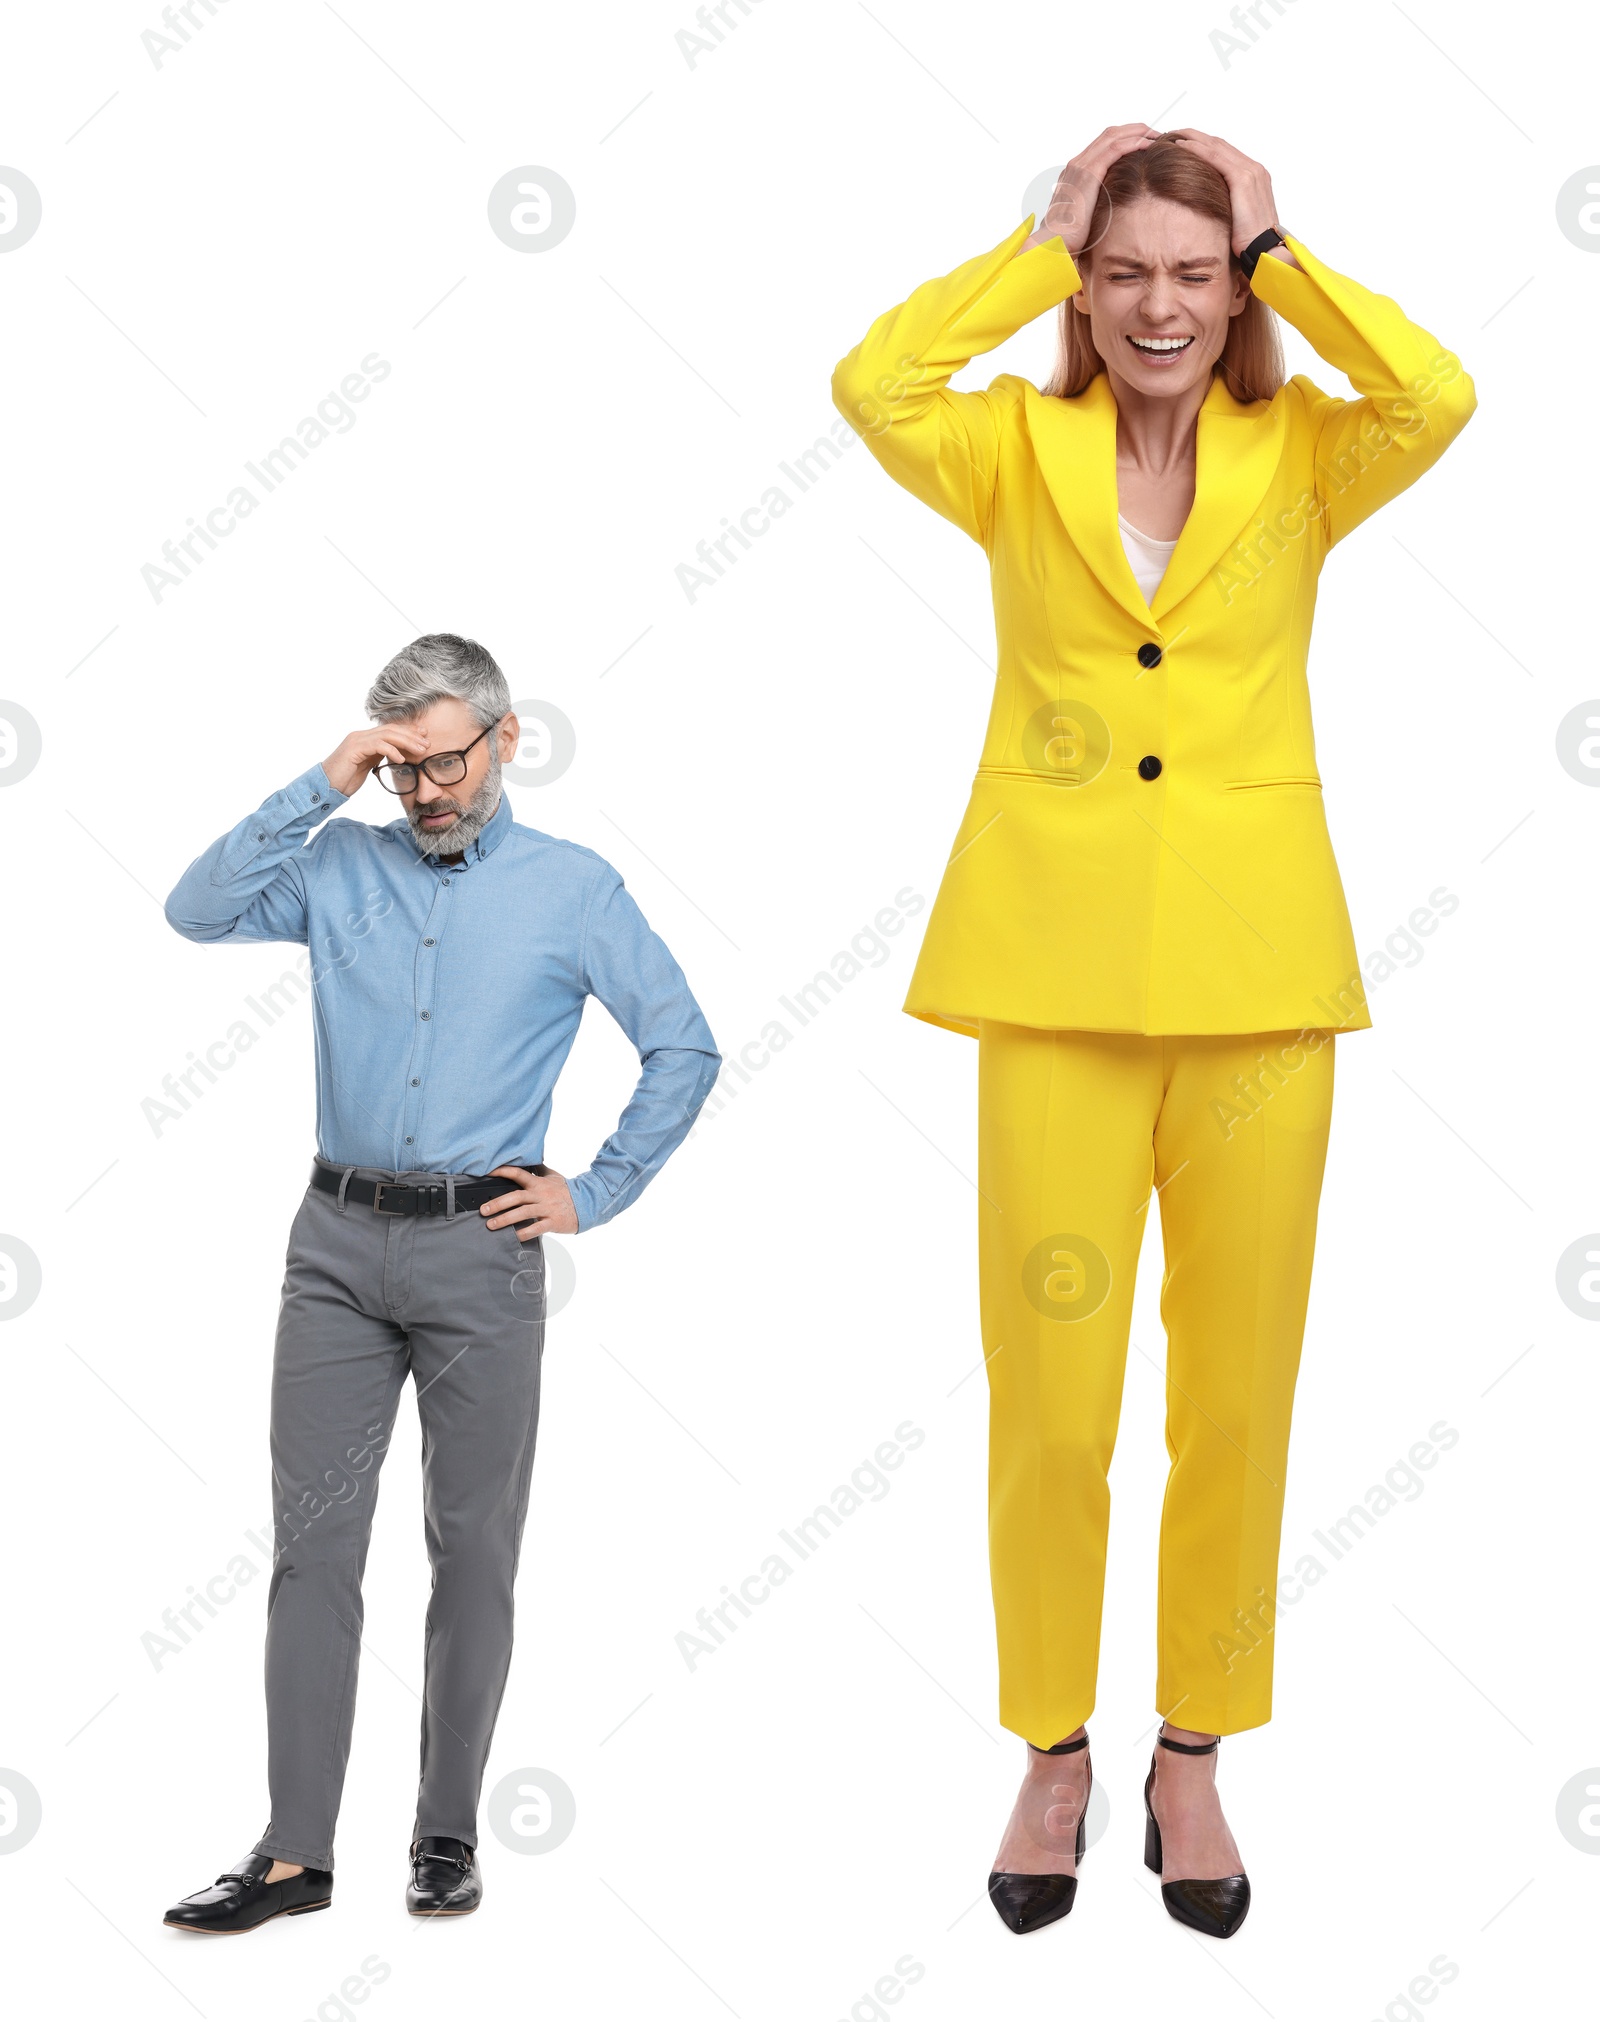 Image of Emotional giant woman and sad small man on white background